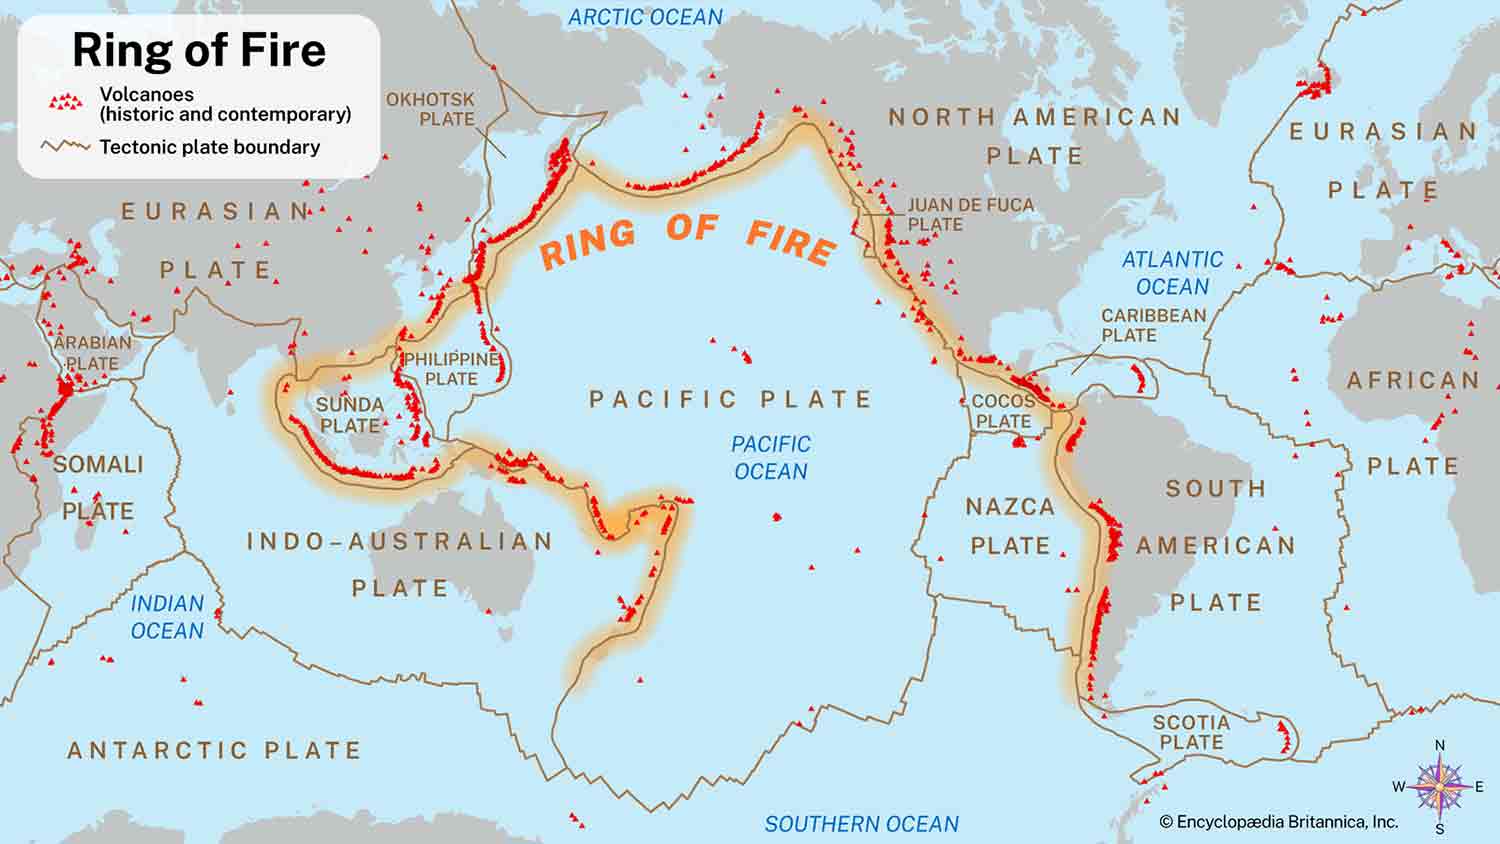 A world map with tectonic plates labeled and the Ring of Fire highlighted.